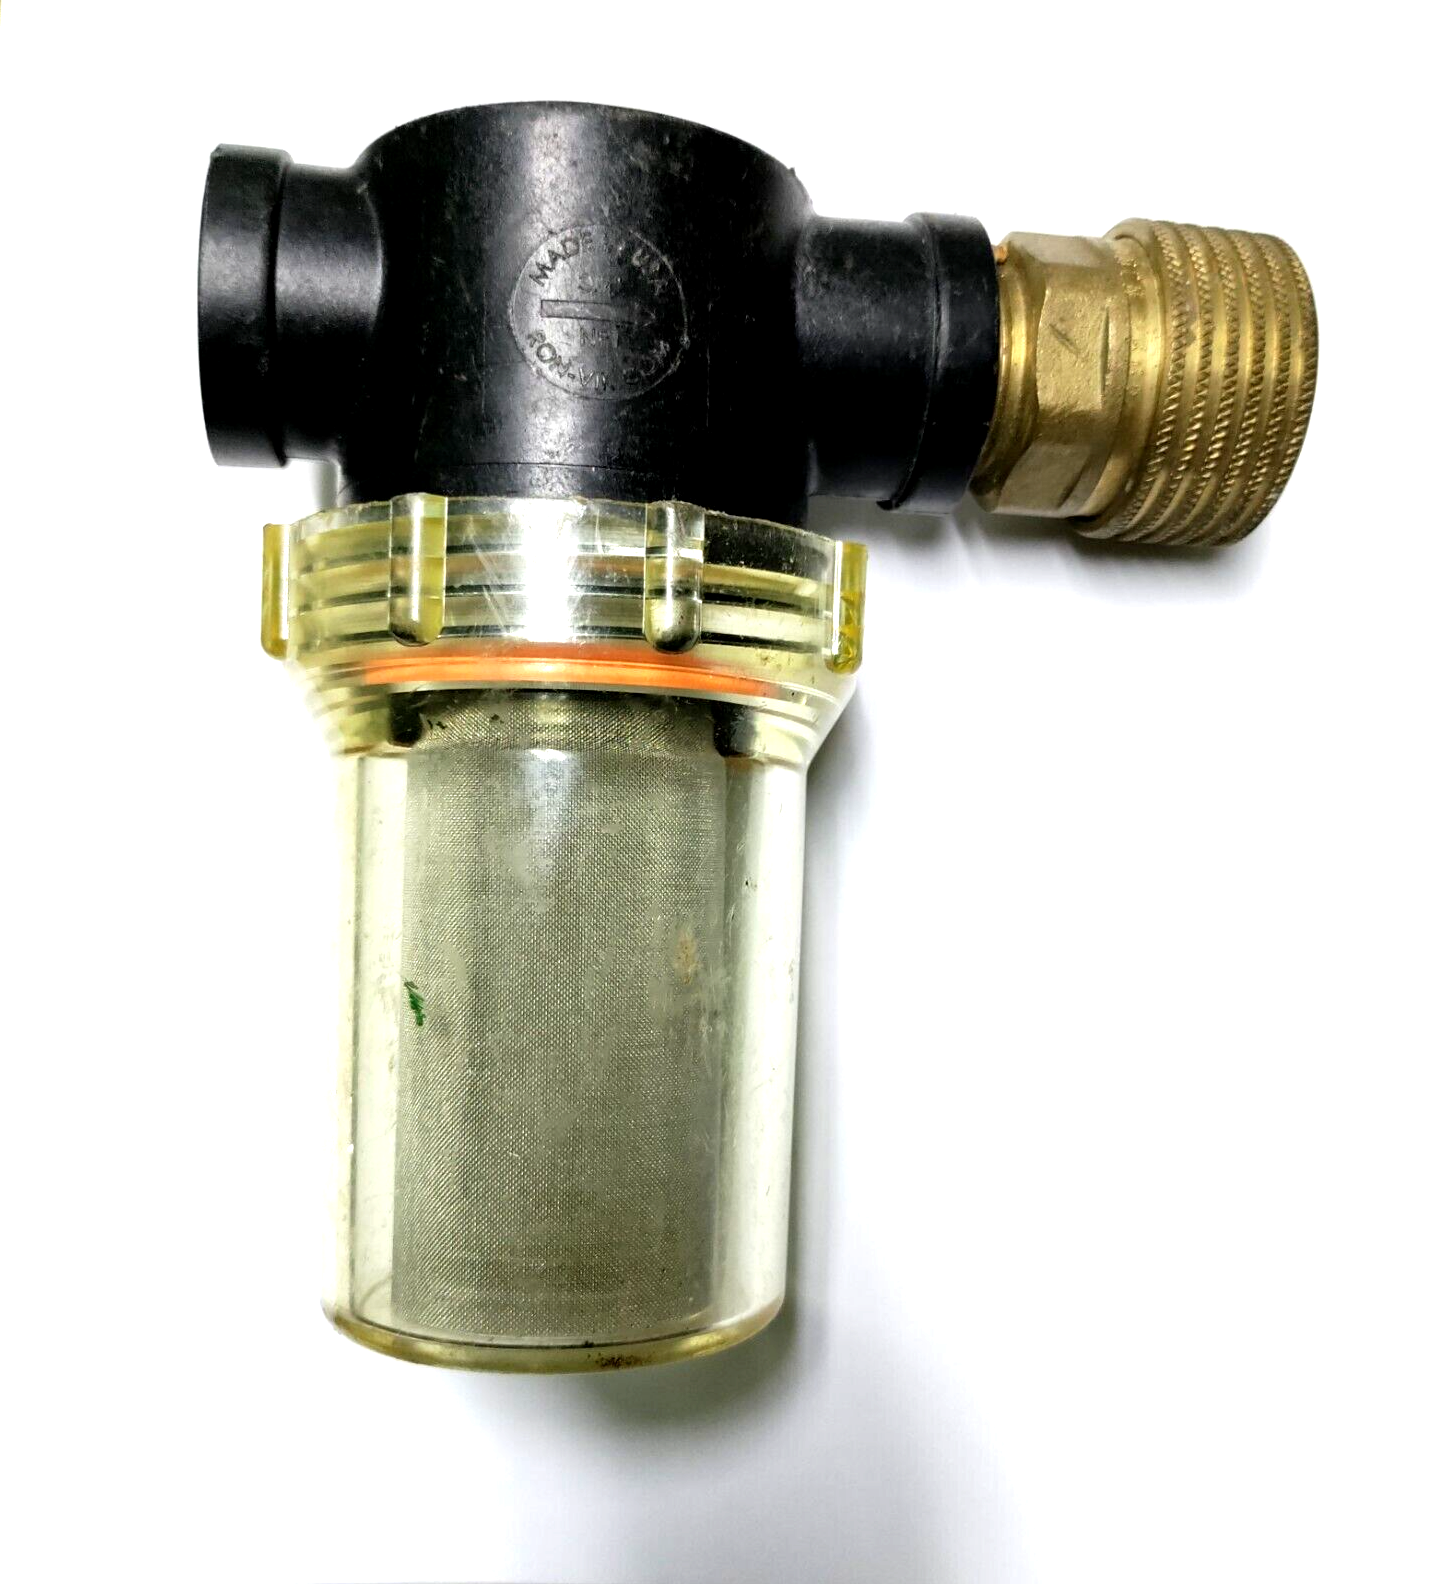 FRESH WATER FILTER, 3/4 INCH NPT QUICK DISCONNECT FOR MARINE WATER SYSTEM